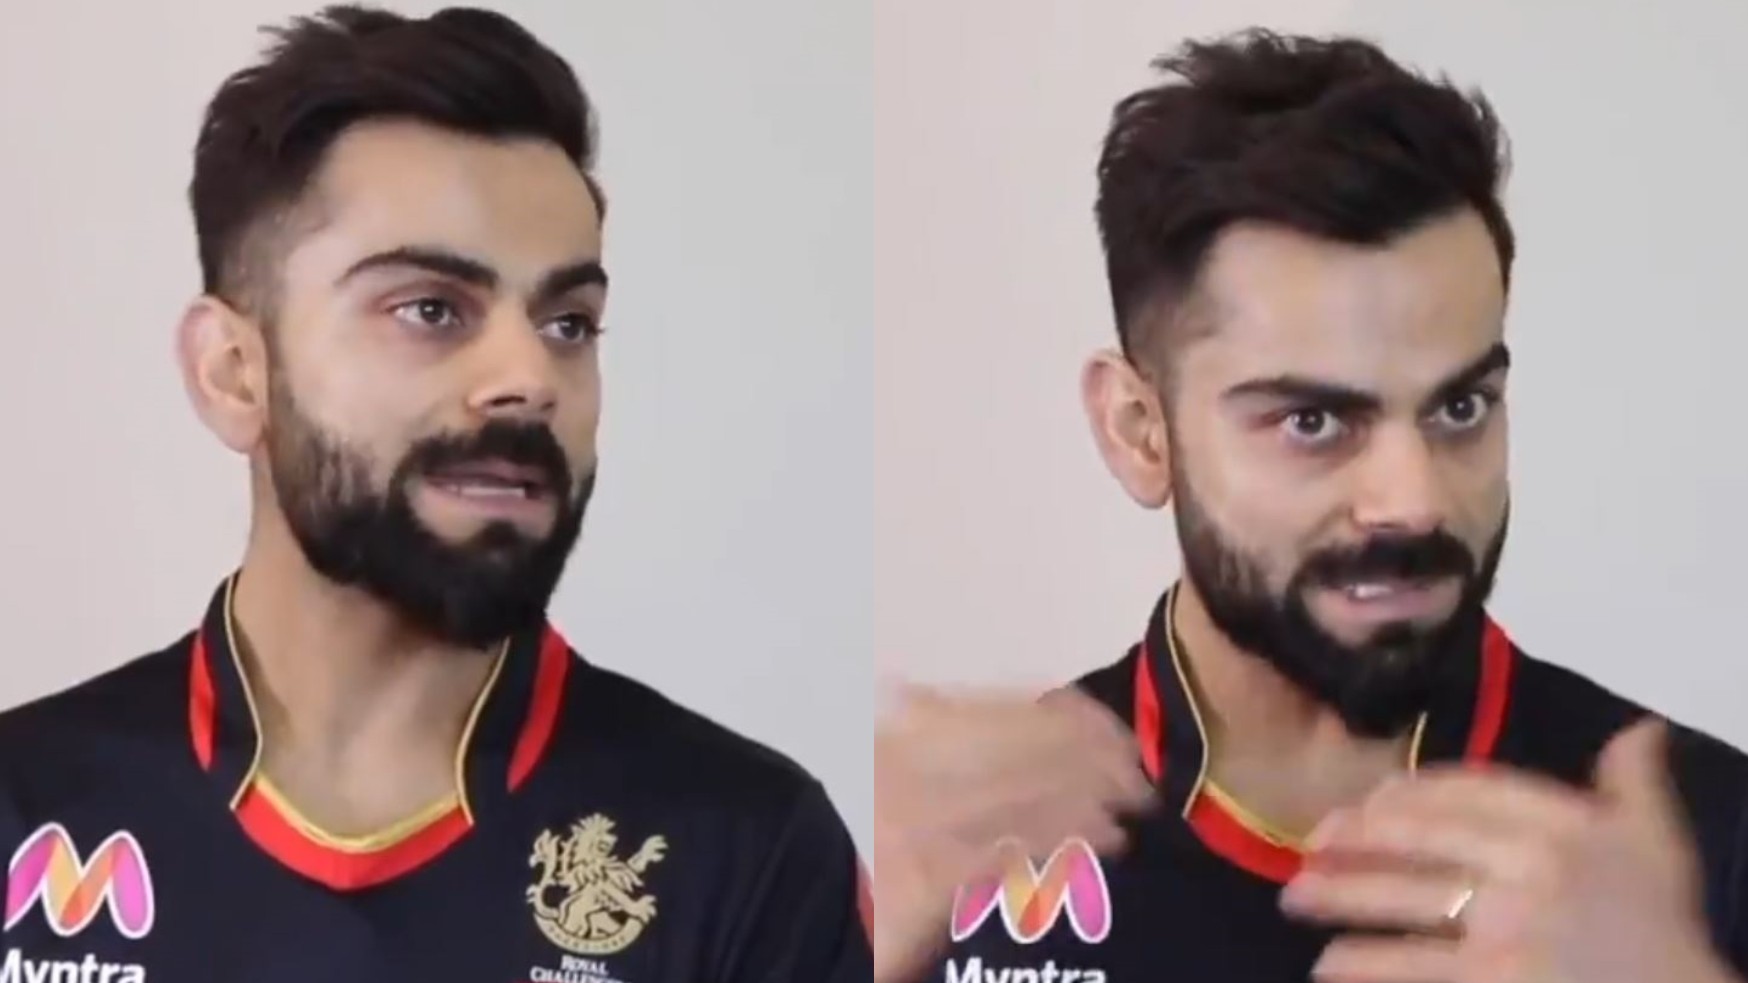 IPL 2020: WATCH- Virat Kohli confident of a miracle from the “most well-balanced” RCB team in IPL